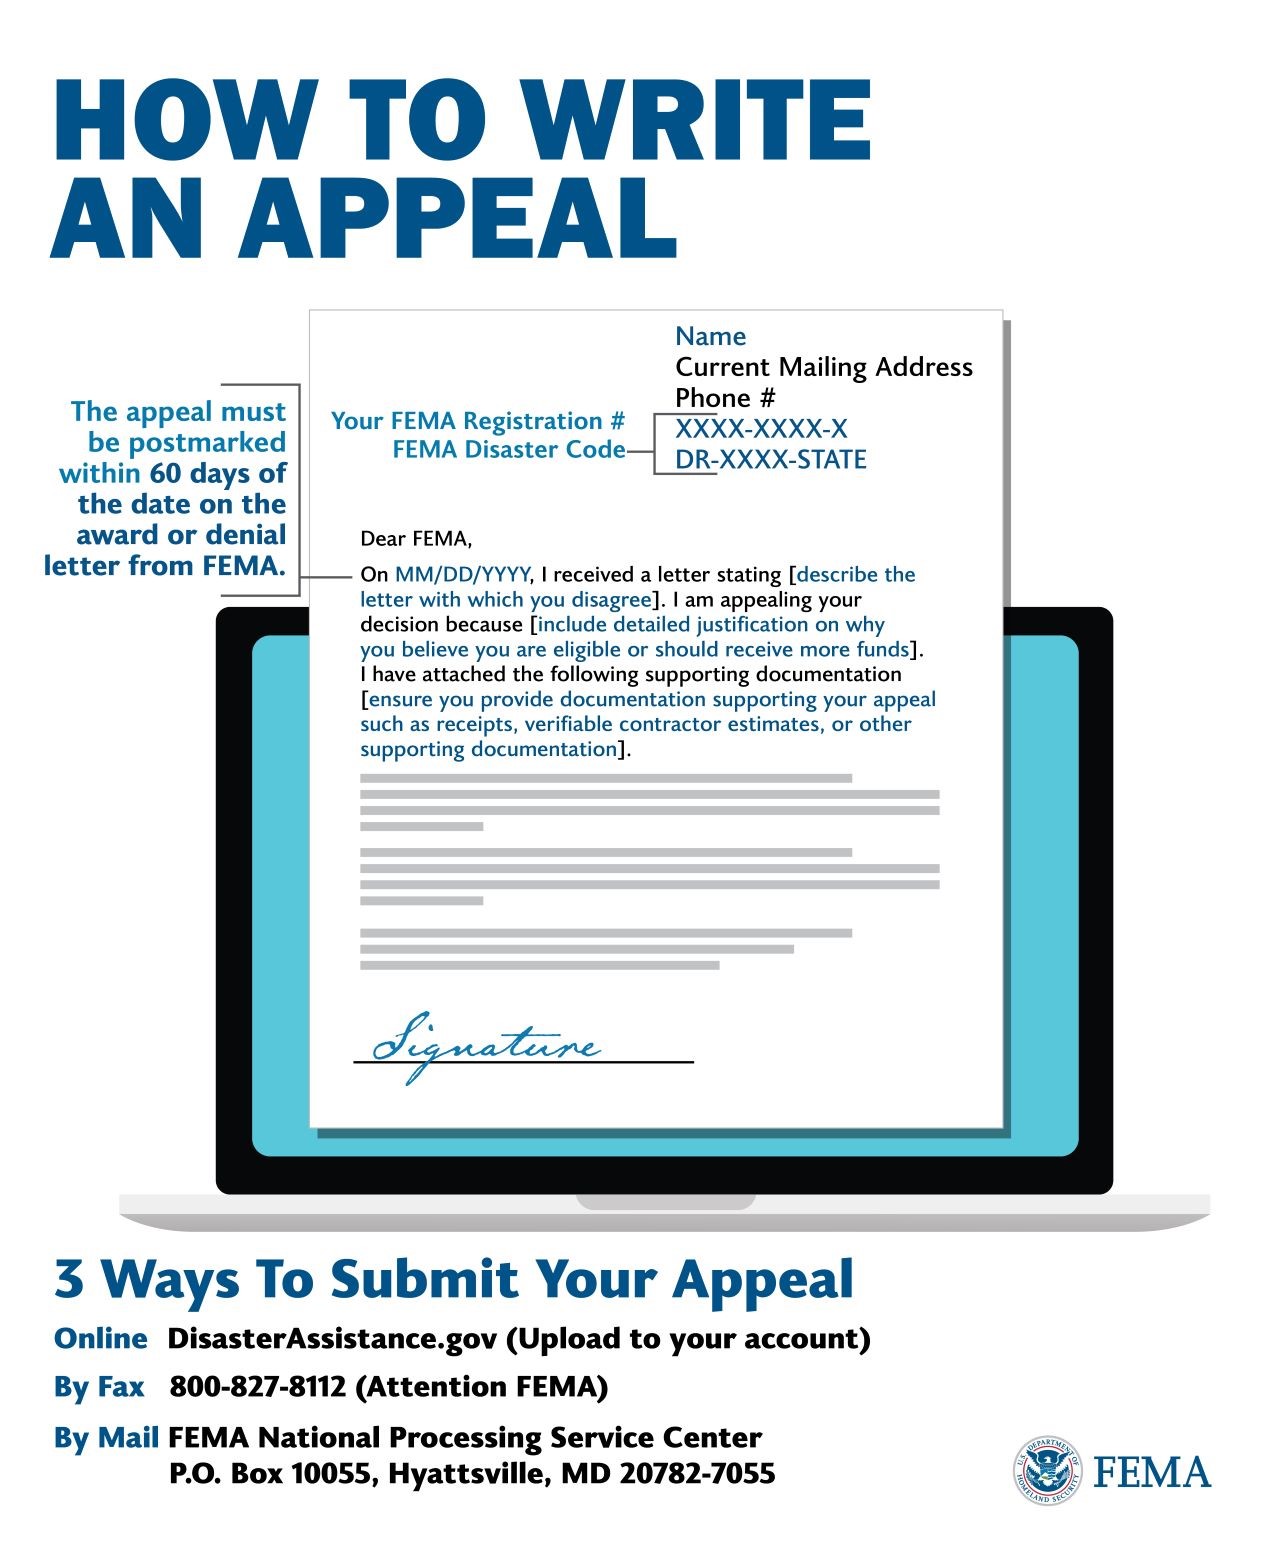 How to Write an Appeal. The appeal must be postmarked within 60 days on the award or the denial latter from FEMA. [Letter Graphic] 3 ways to Submit your appeal: Online at disasterassistance.gov, by fax at 800-827-8112 or by mail at FEMA National Intake Processing Service Center, PO BOX 10055, Hyattsville, MD, 20782-7055